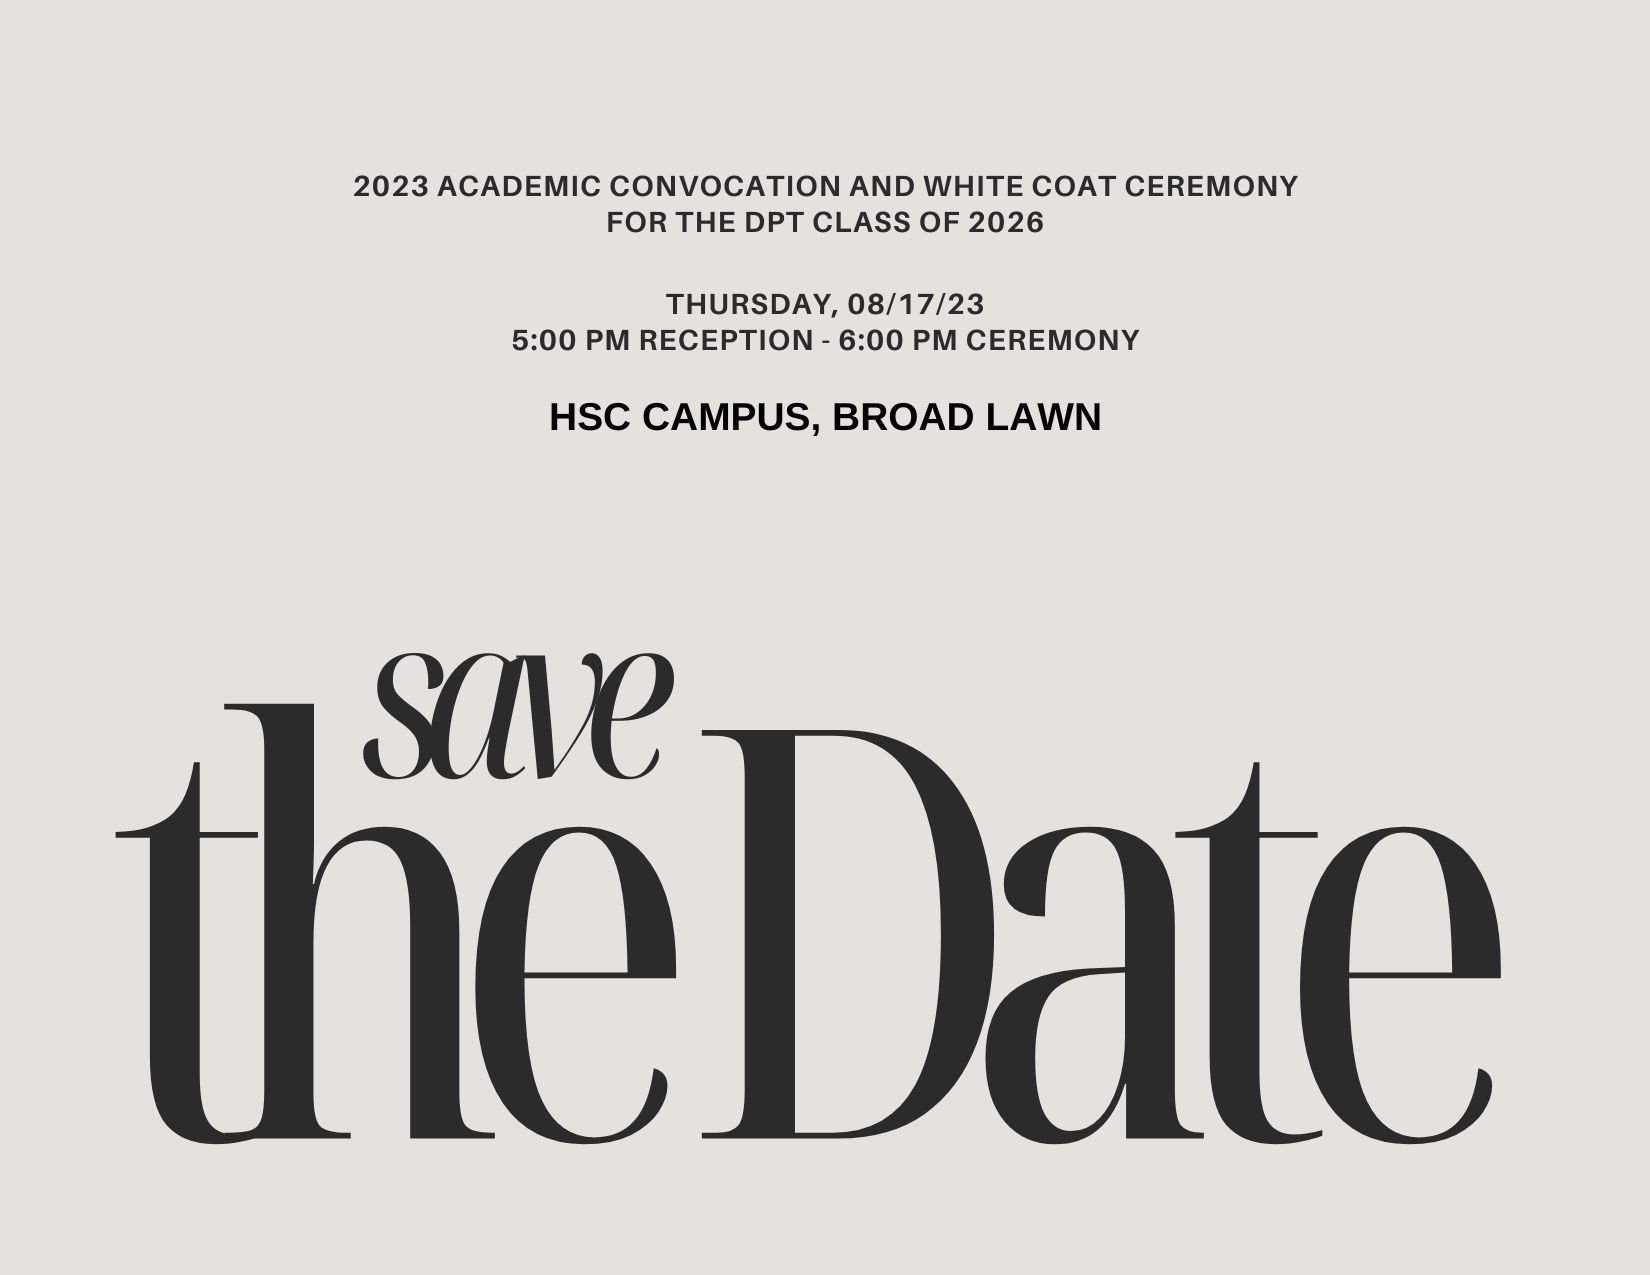 Save the Date graphic